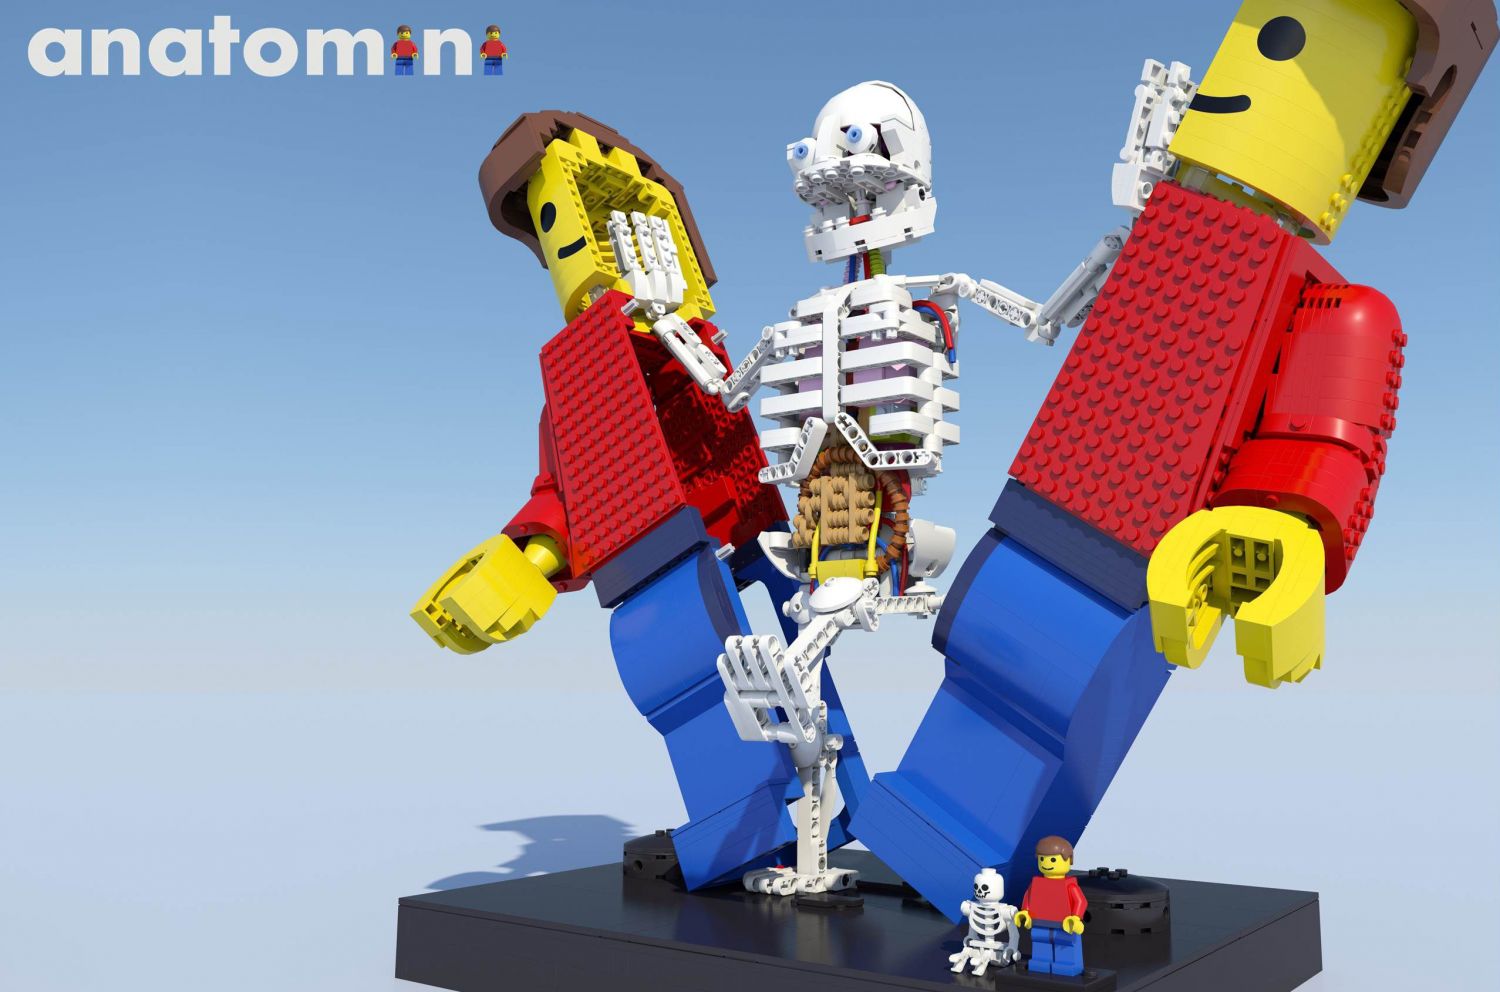 Rejected LEGO Ideas Projects Will Live On Via BrickLink Designer Program In 2021 | Geek Culture